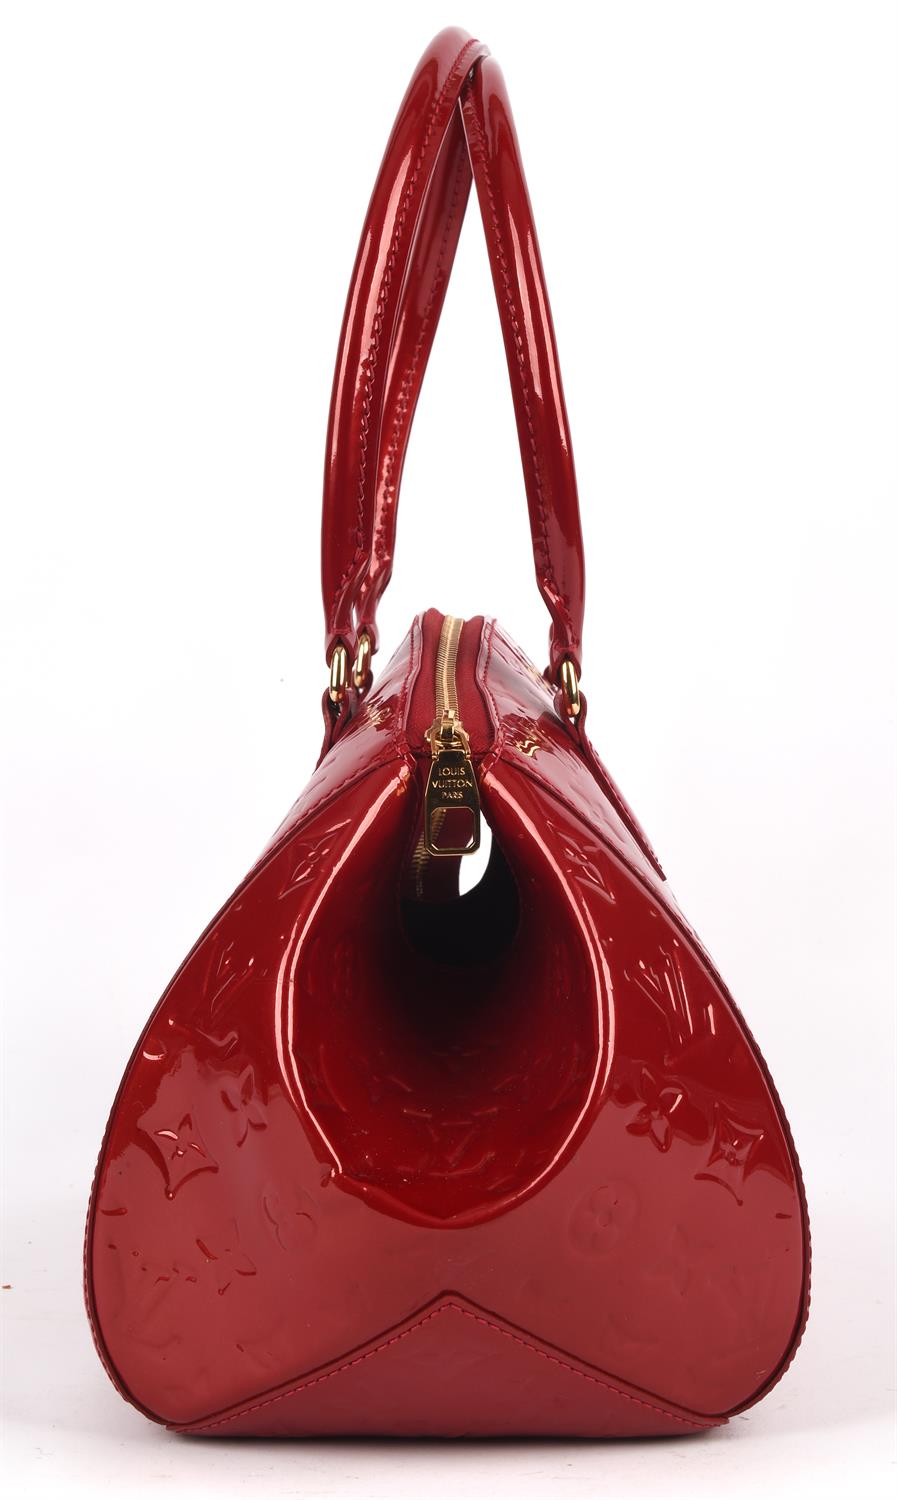 LOUIS VUITTON lipstick red Vernis varnished leather French Montana handbag with gold coloured - Image 3 of 8